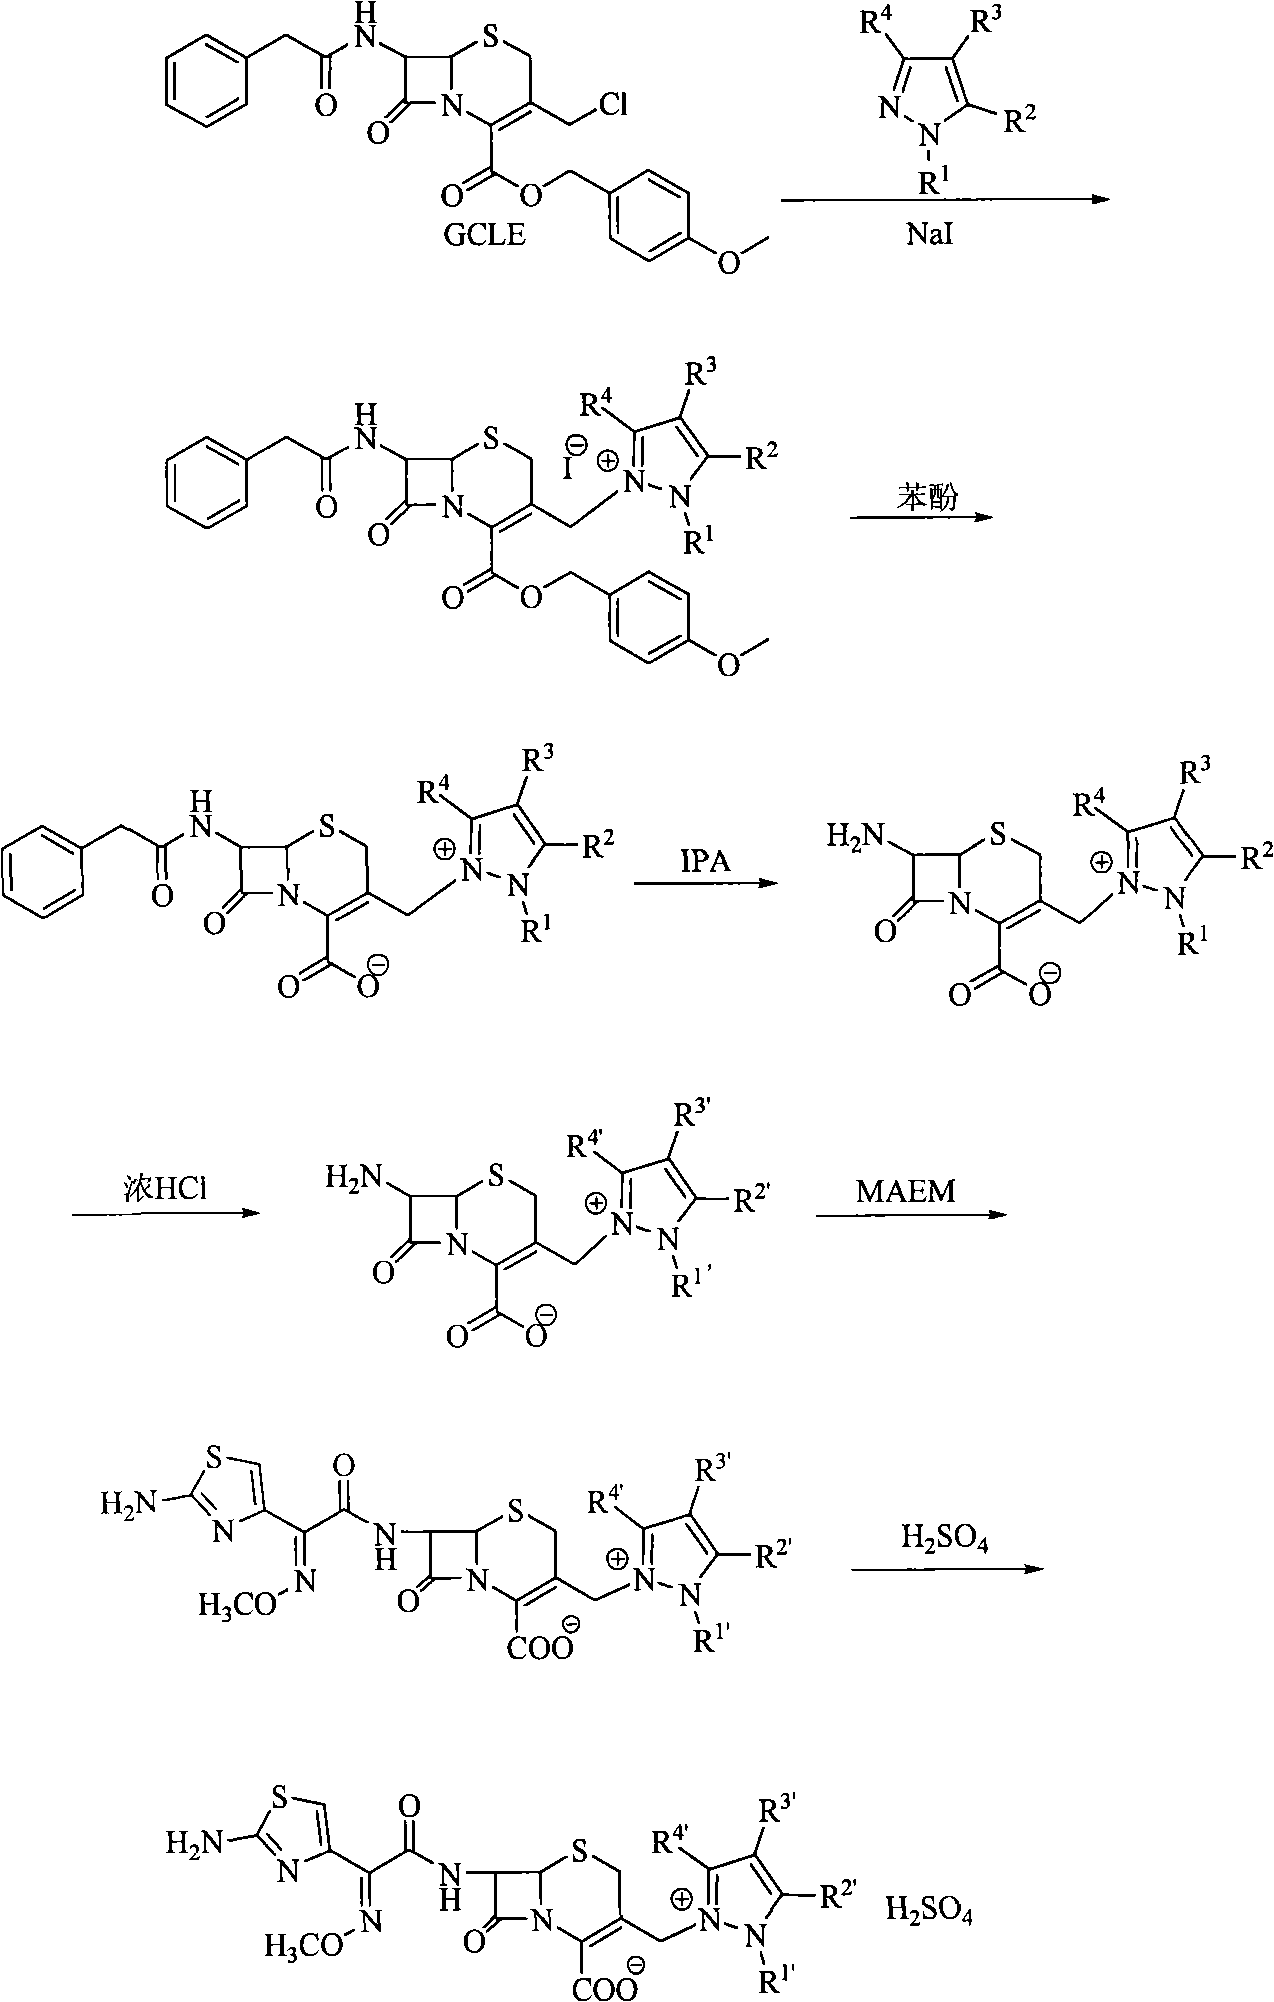 Novel technique for synthesizing cefoselis sulfate